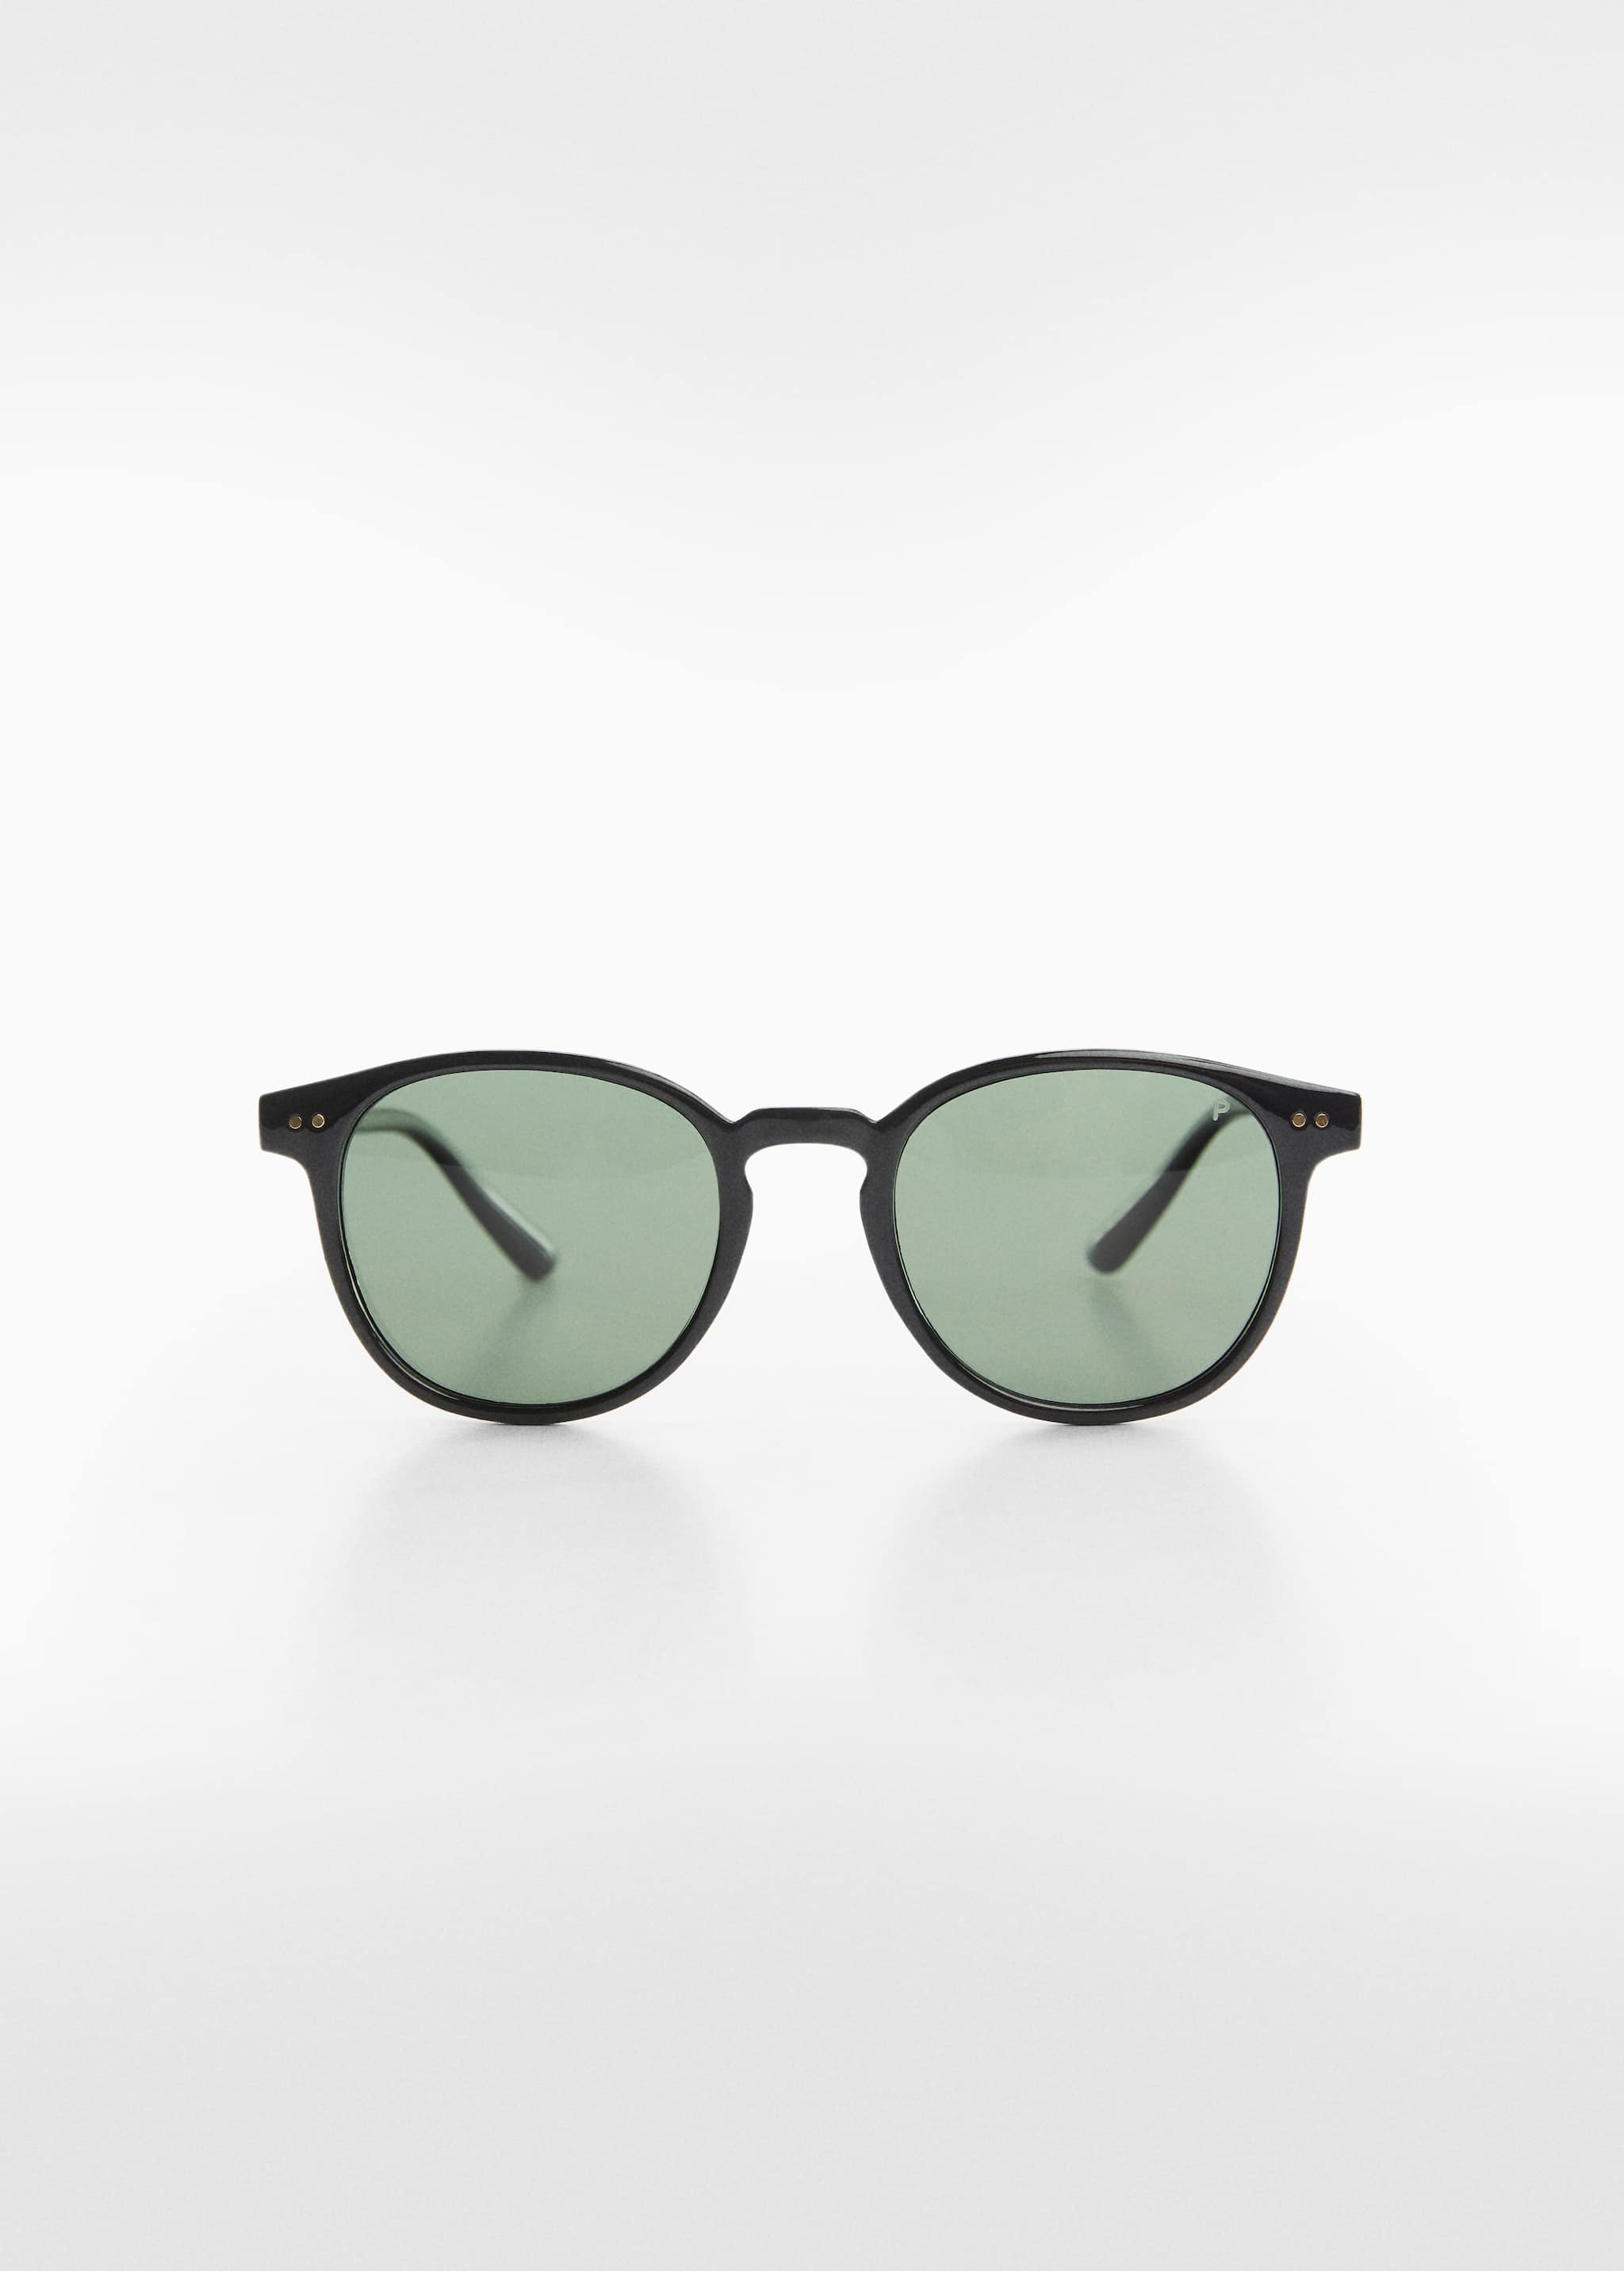 Polarised sunglasses - Article without model